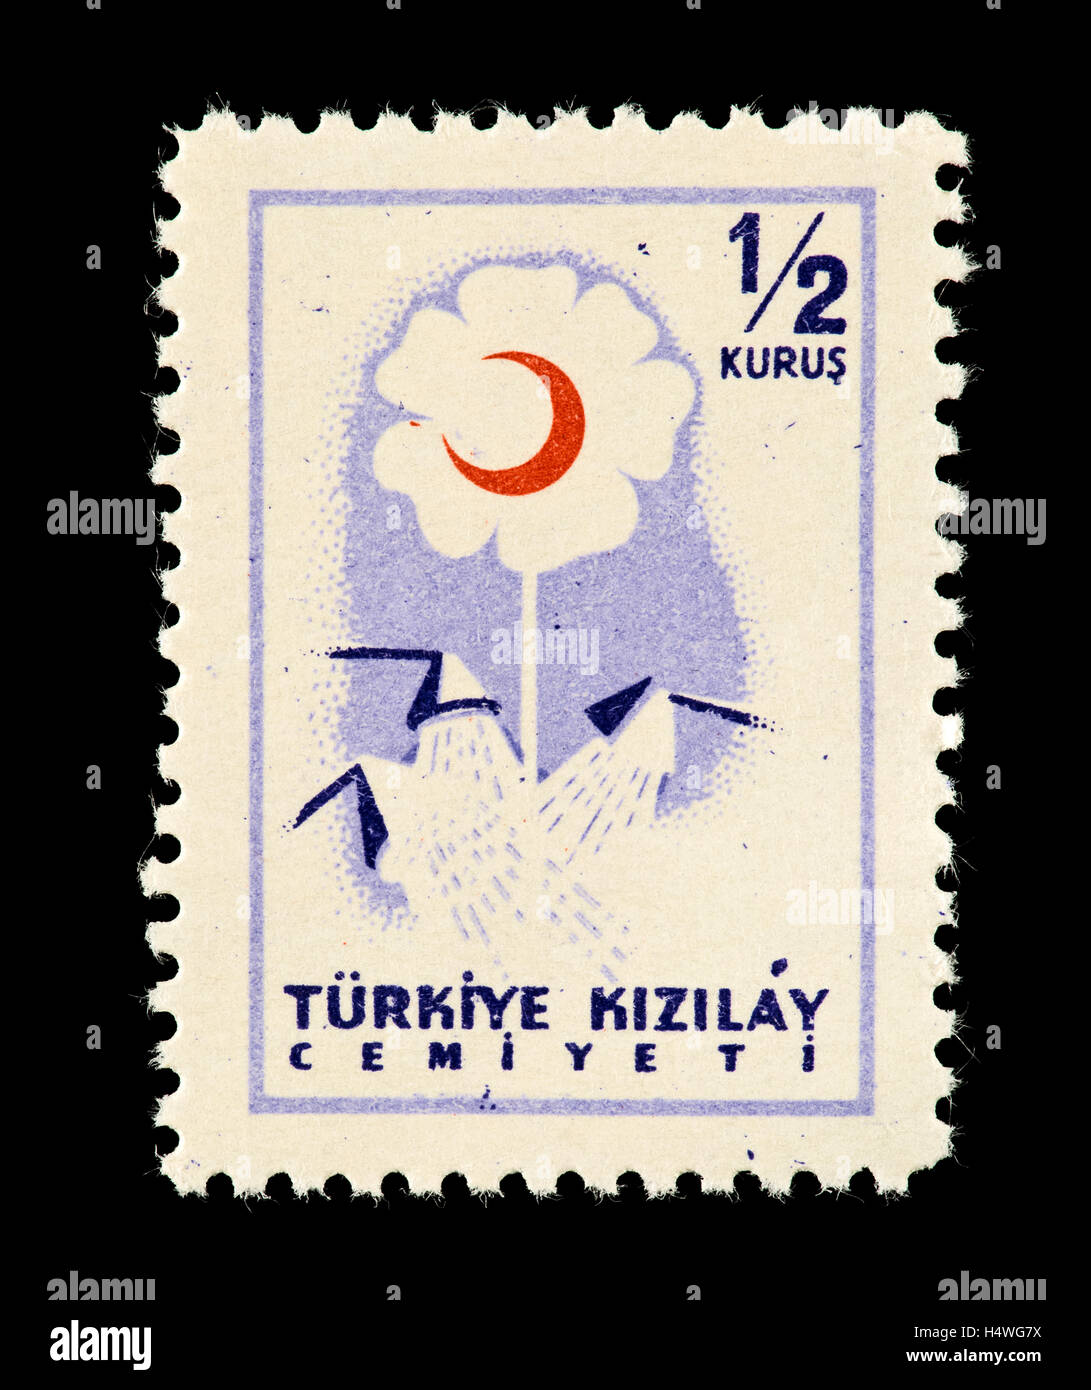 Postal tax stamp from Turkey depicting a flower and Red Crescent Stock Photo